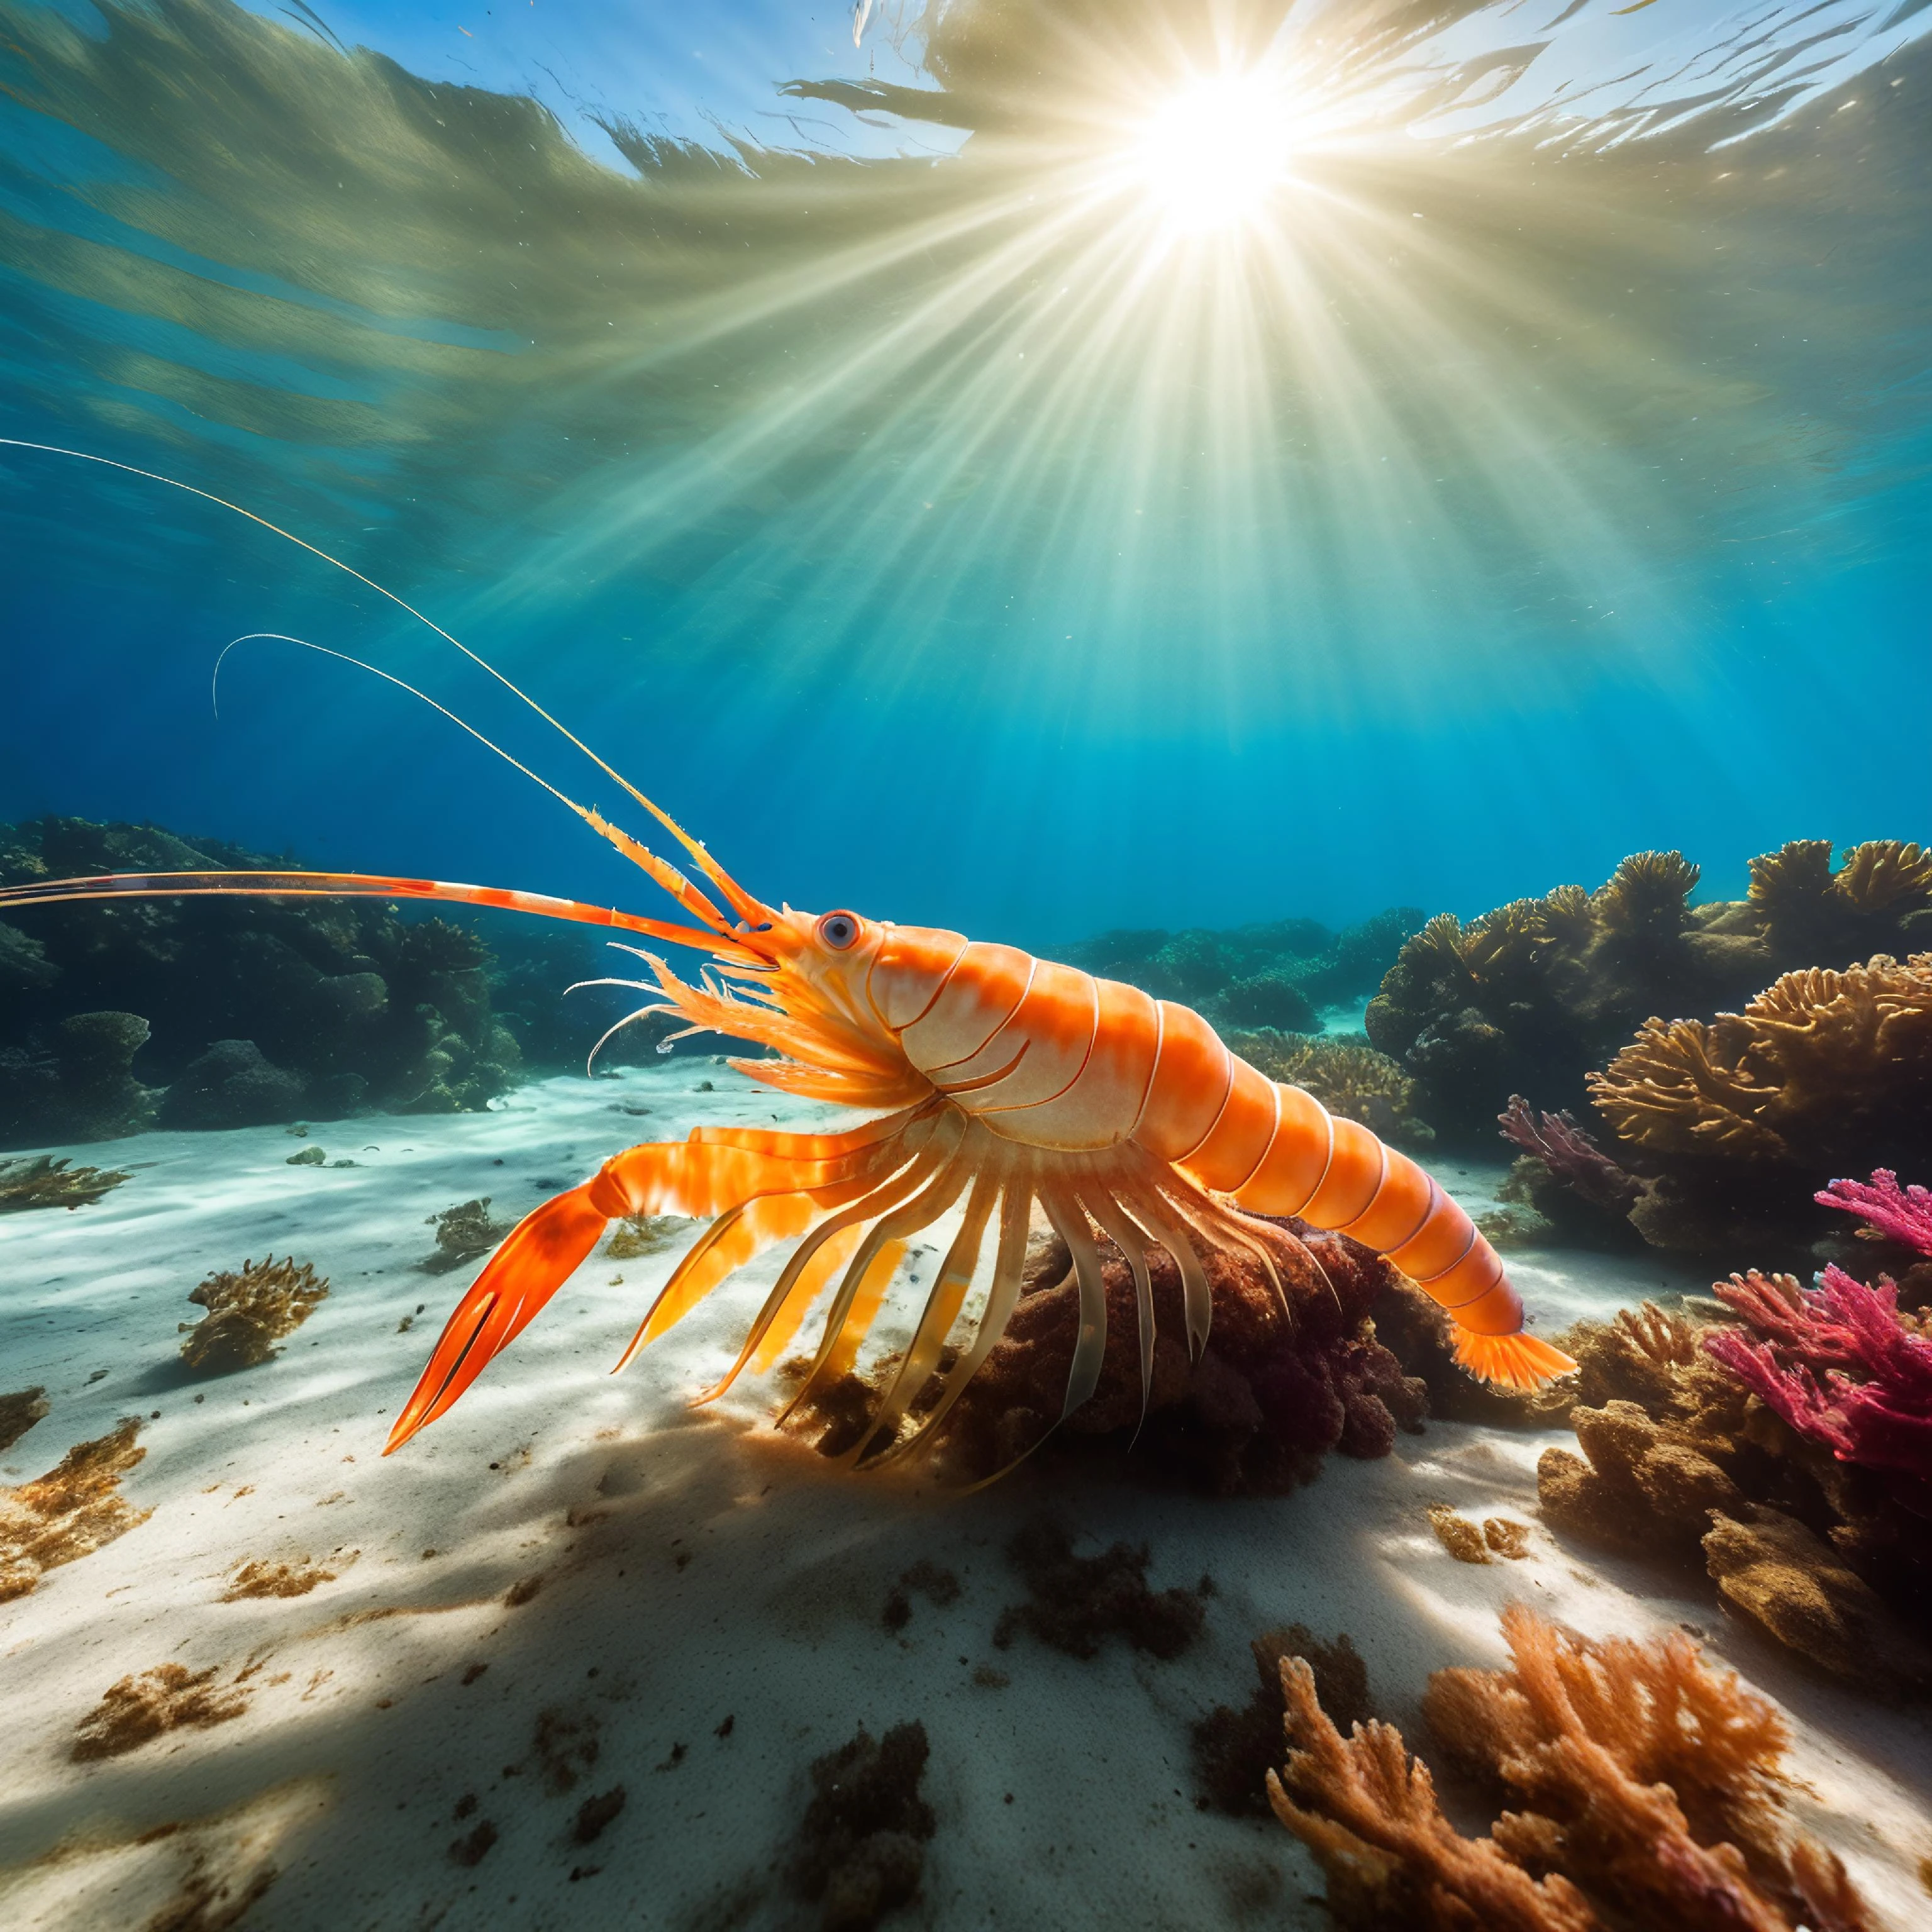 underwater nature photo, a giant prawn scuttling along the seabed, chasing a floating bit of seaweed, sunlight filtering through the water, sandy seabed, vibrant colors